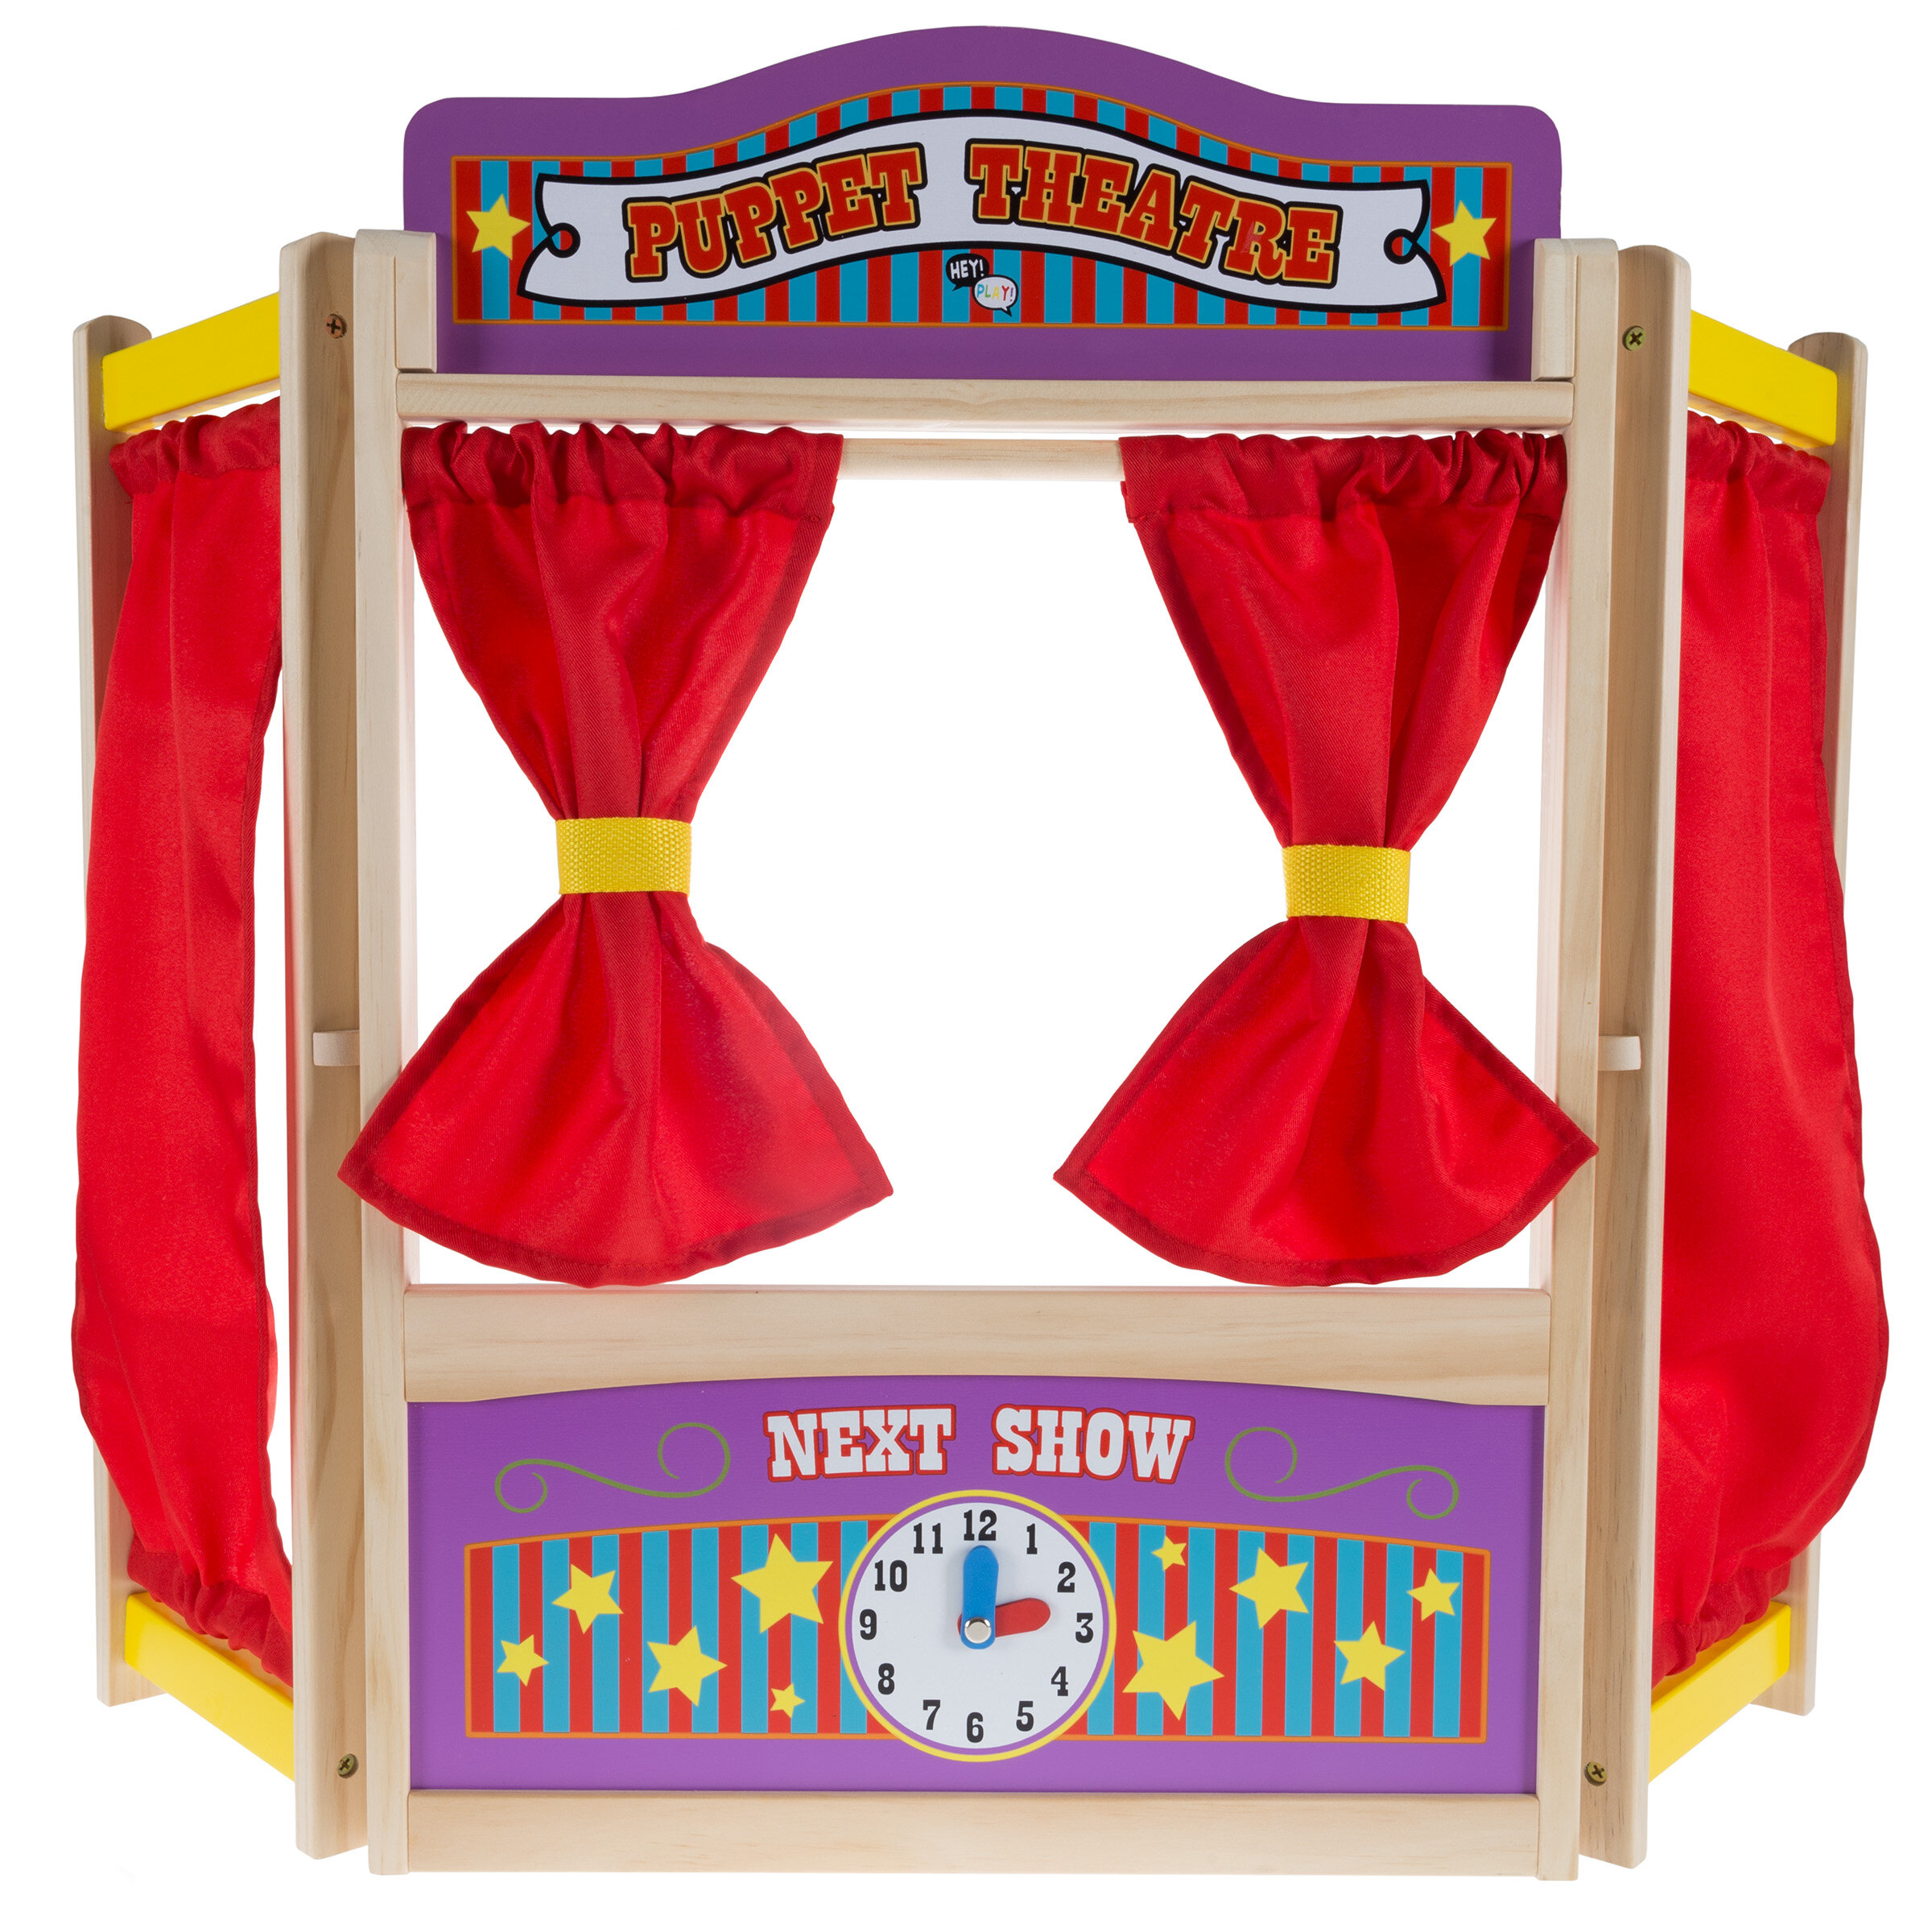 Puppet Stand Set Educational Finger Puppets for Holiday Bookshelf